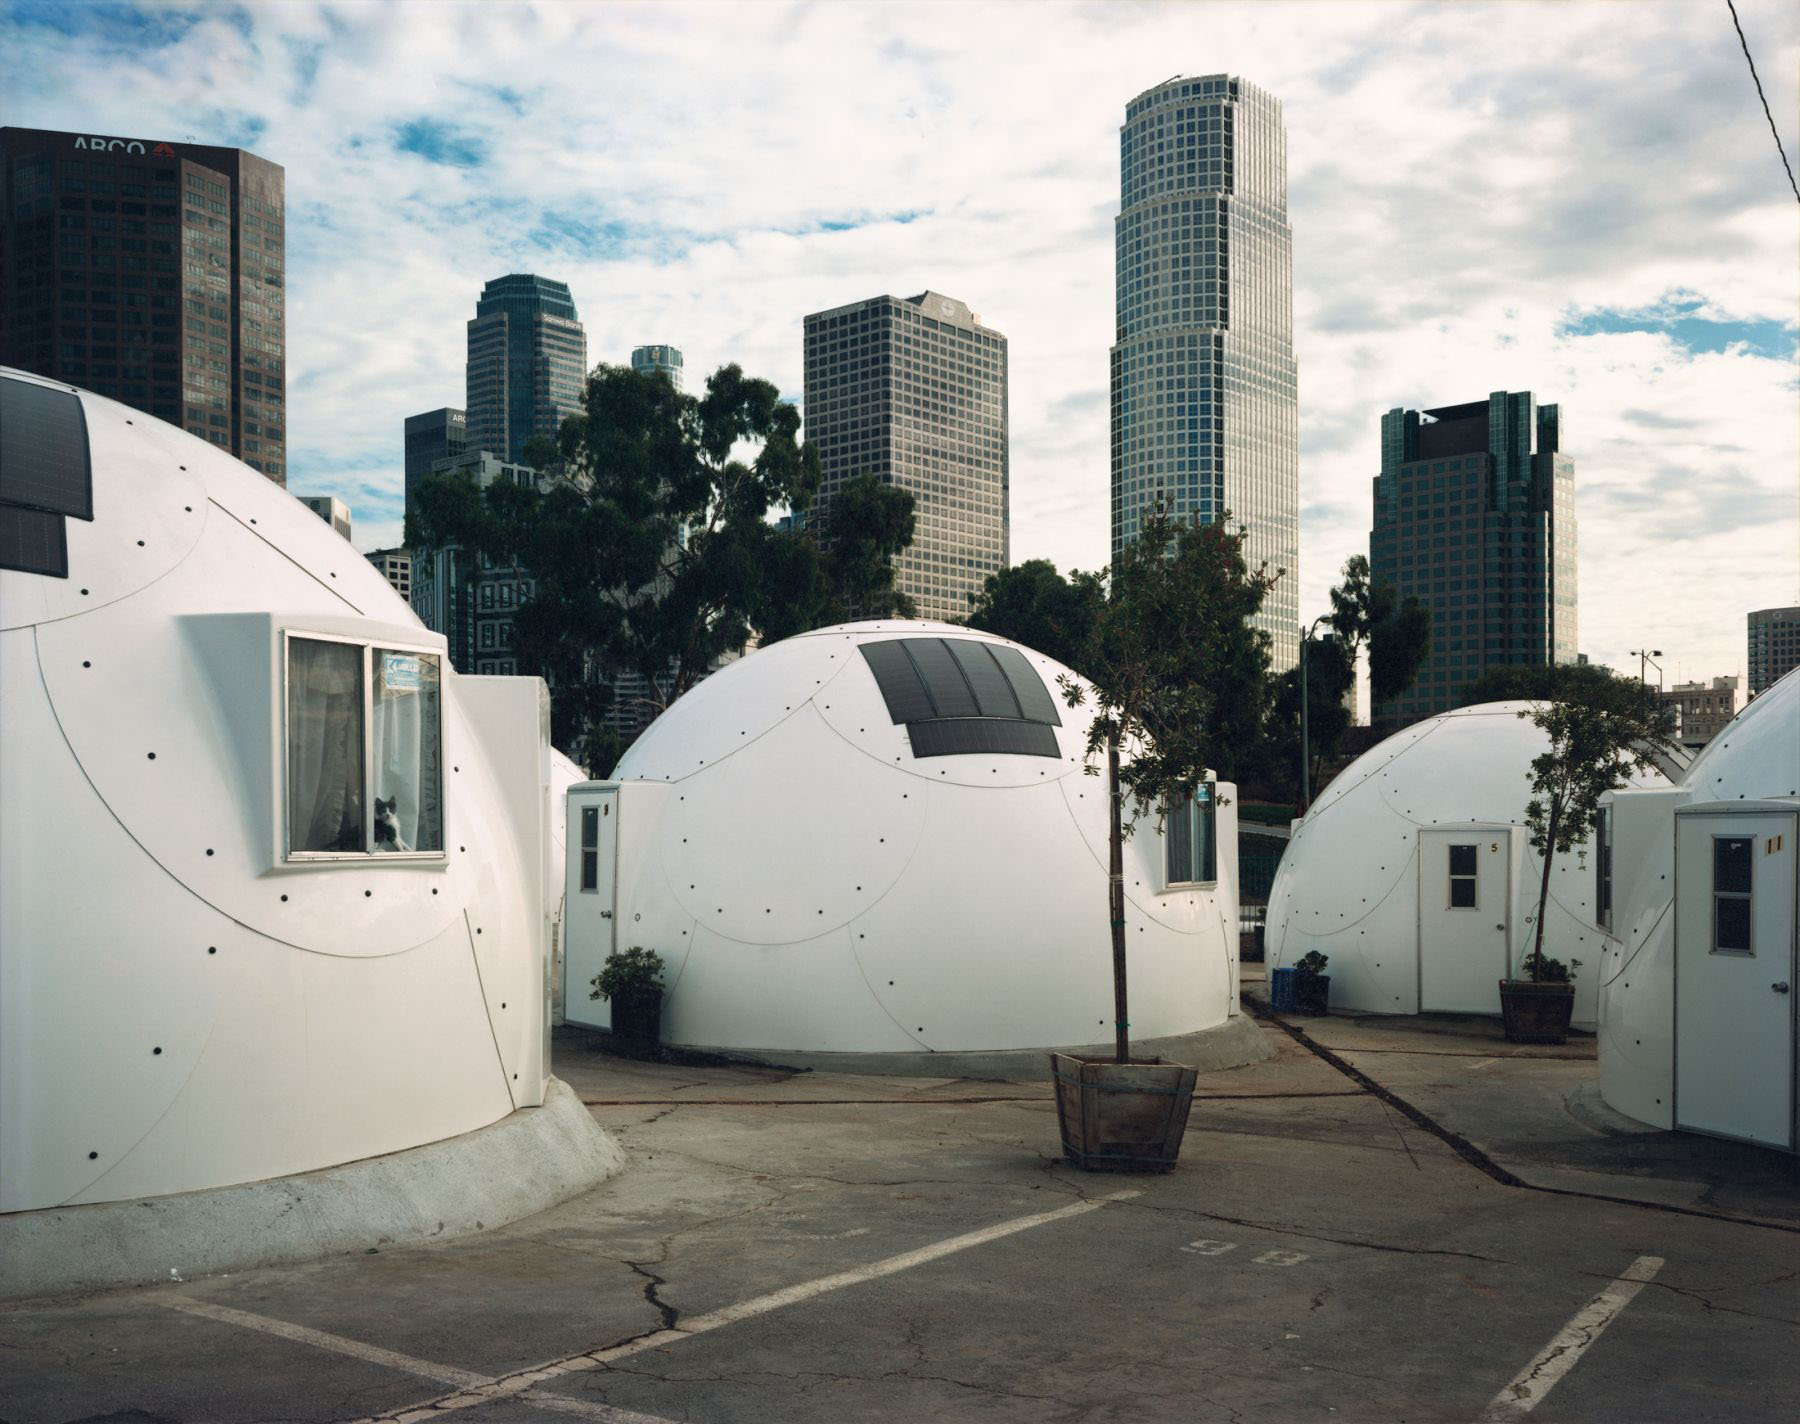 Dome Village, Los Angeles, California, August 1994